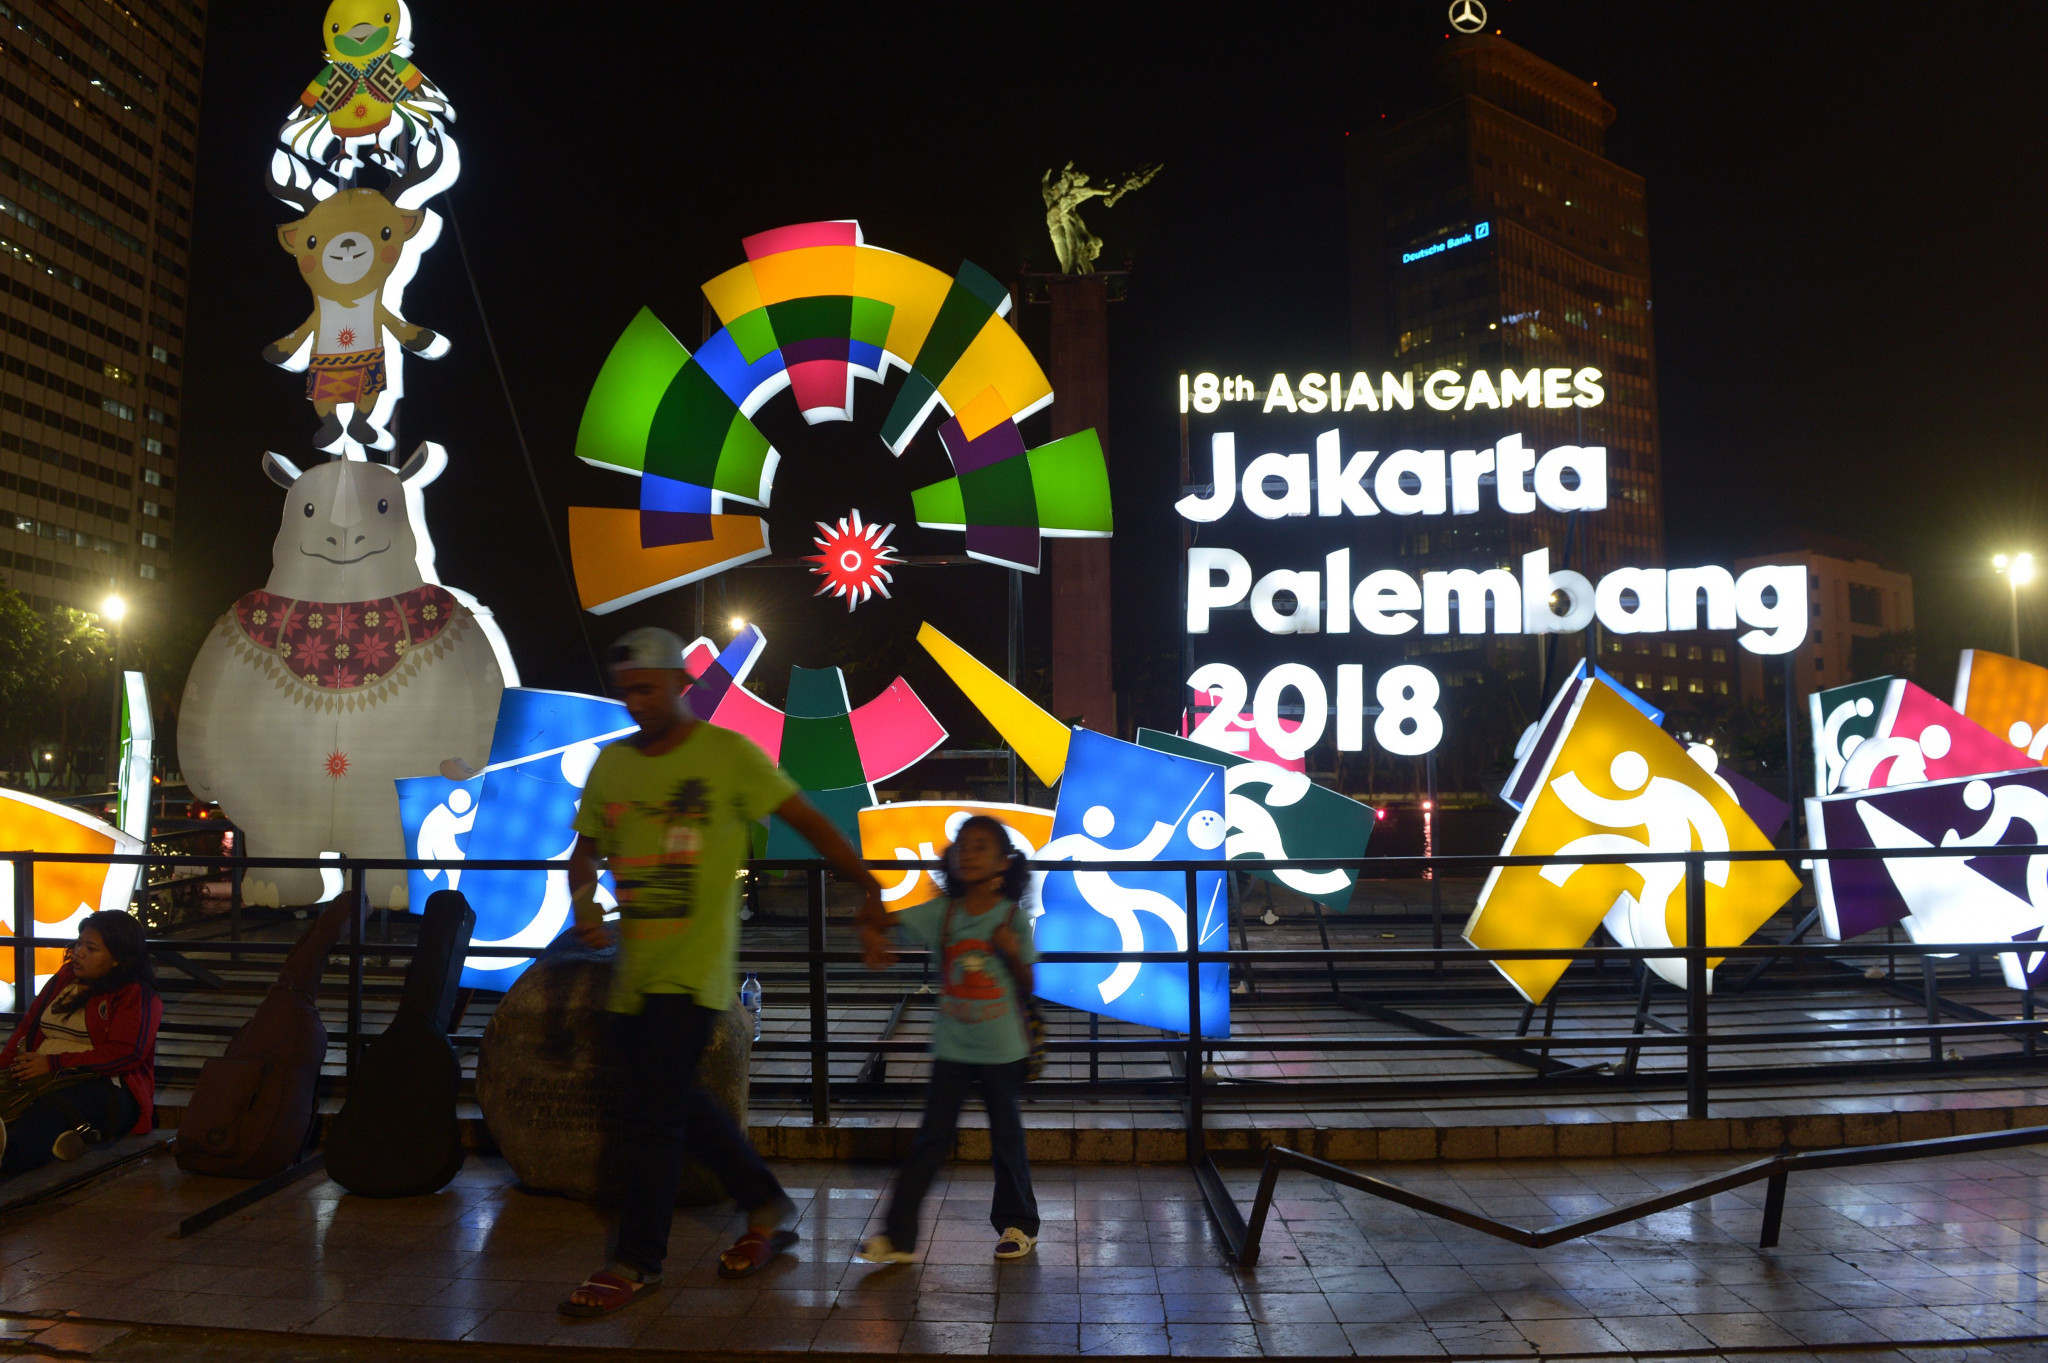 Jakarta Palembang 2018 organisers say Games will be delivered on time